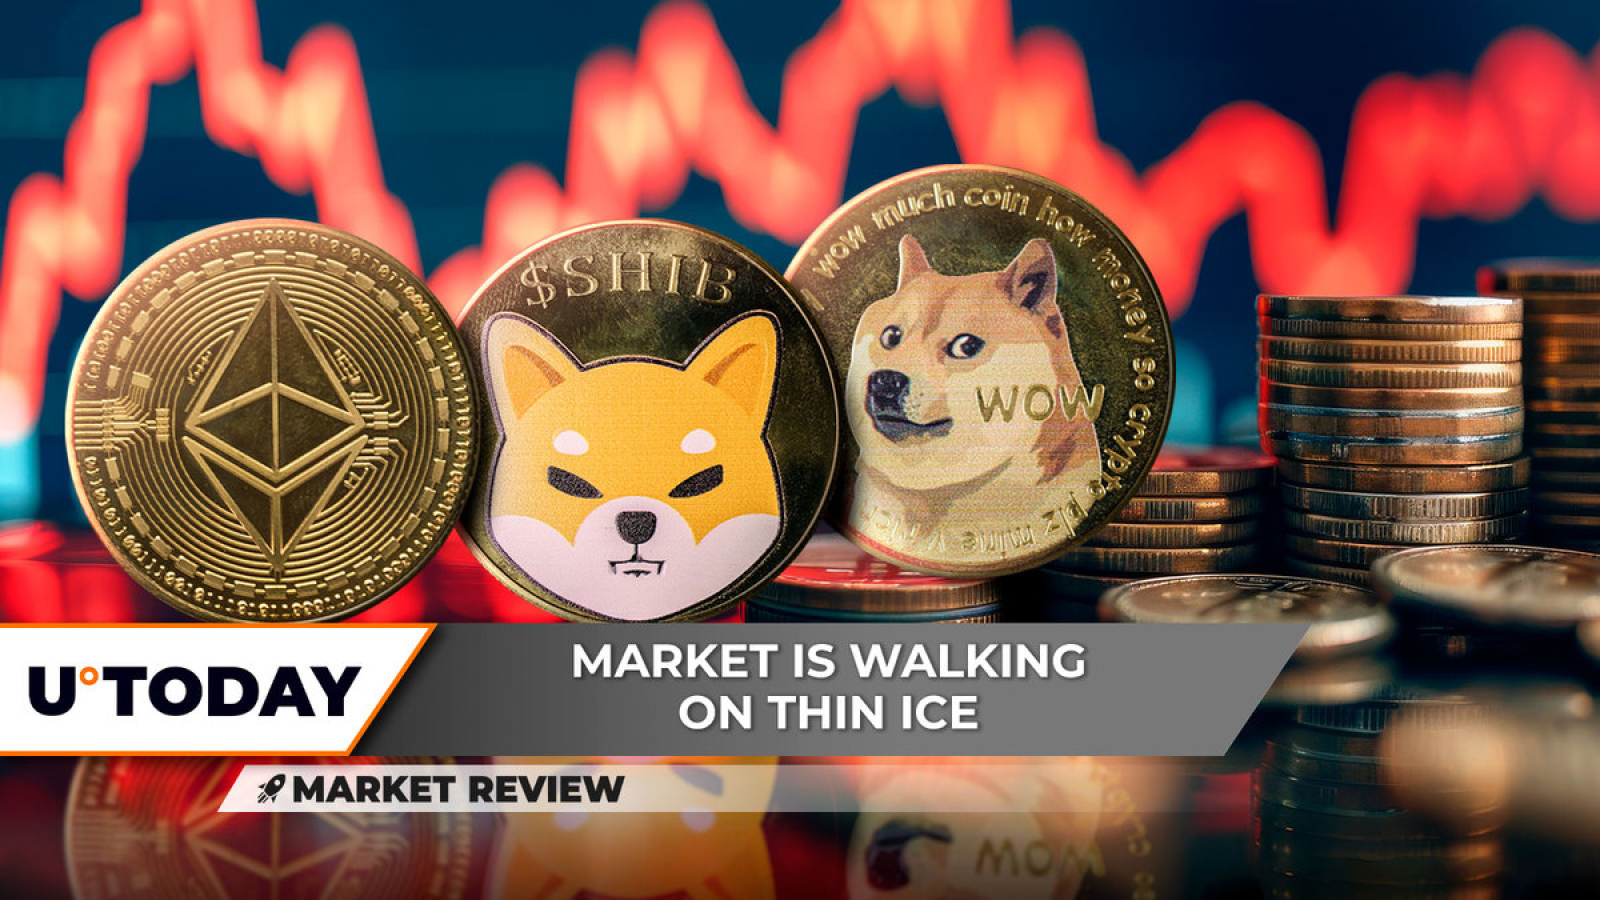 Shiba Inu (SHIB) Hanging on Verge of Cliff, Dogecoin (DOGE) Heading Toward $0.13, Ethereum (ETH) Really Needs This Support